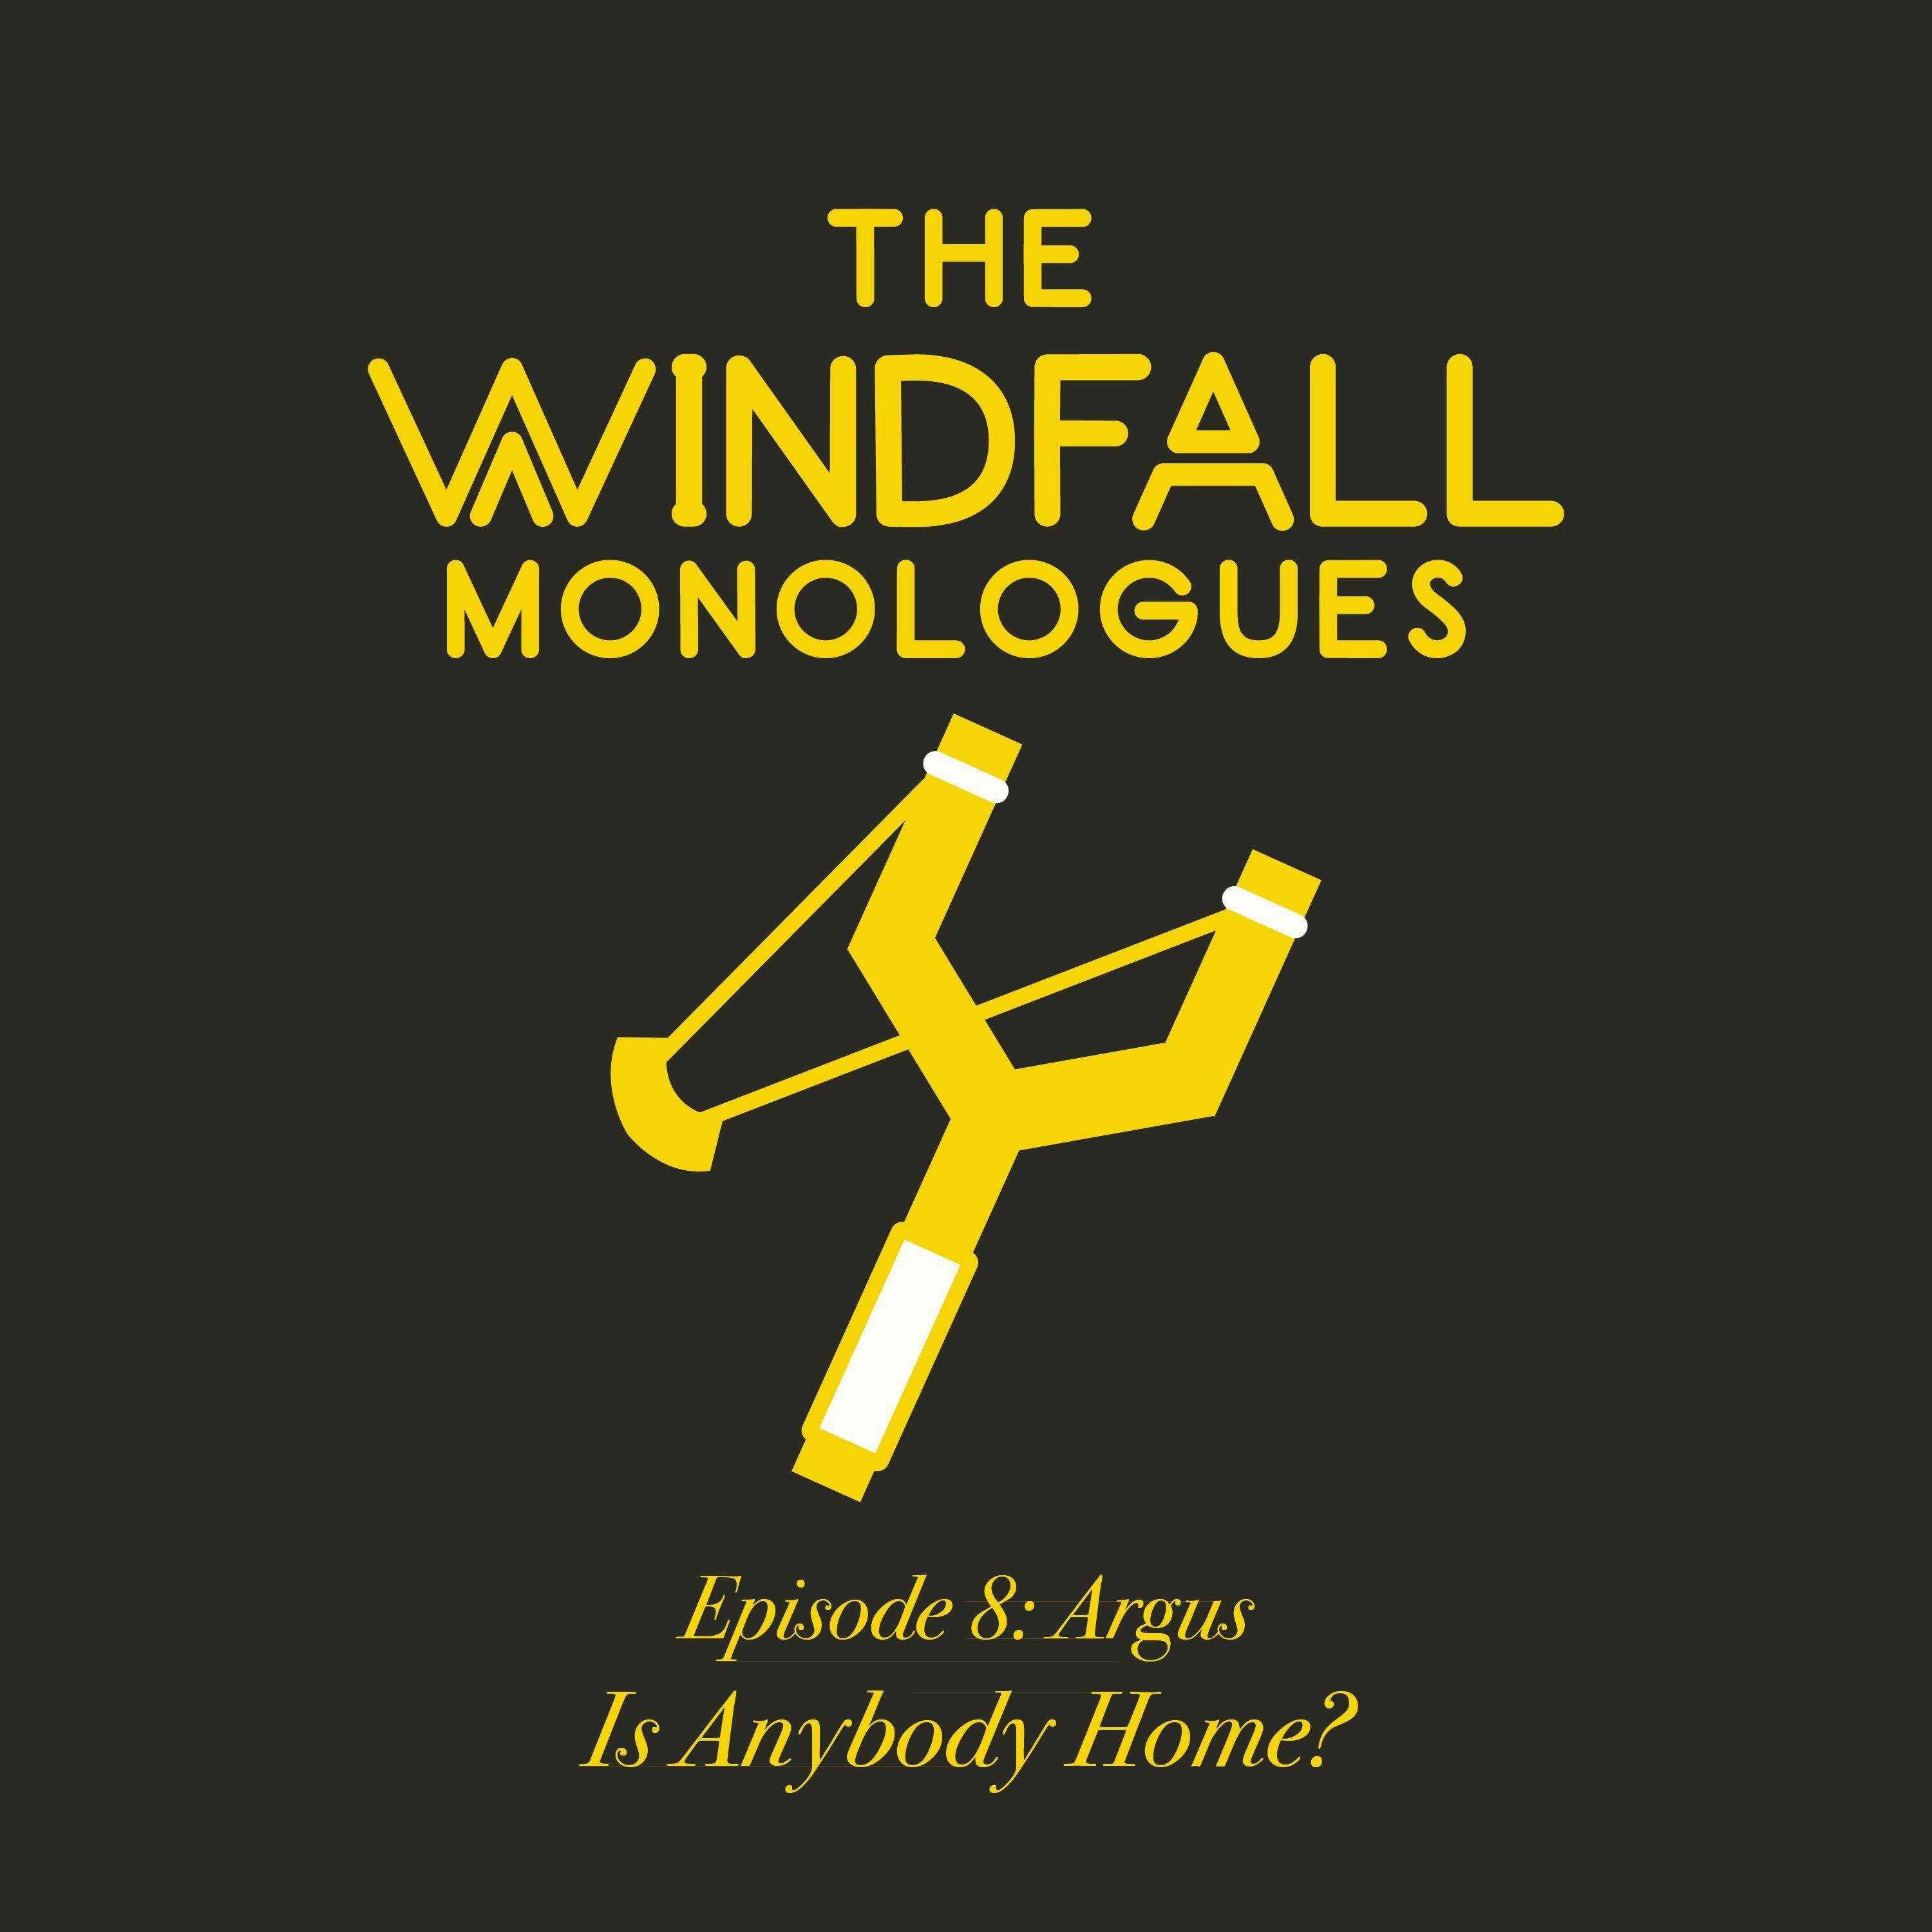 The Windfall Monologues: Is Anybody Home?